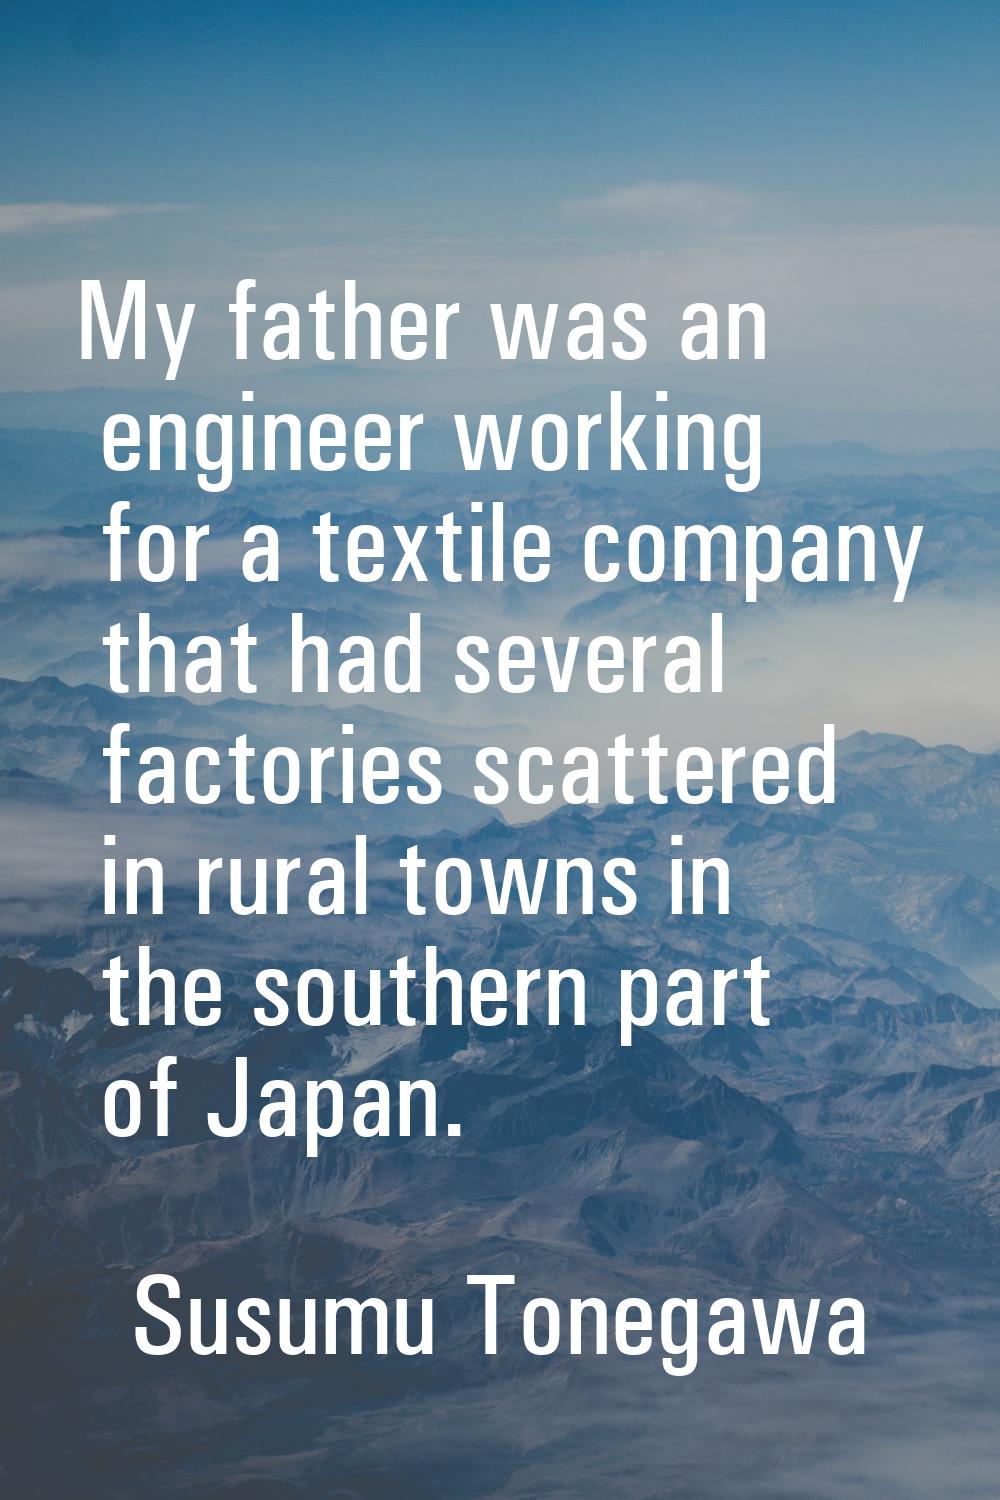 My father was an engineer working for a textile company that had several factories scattered in rur